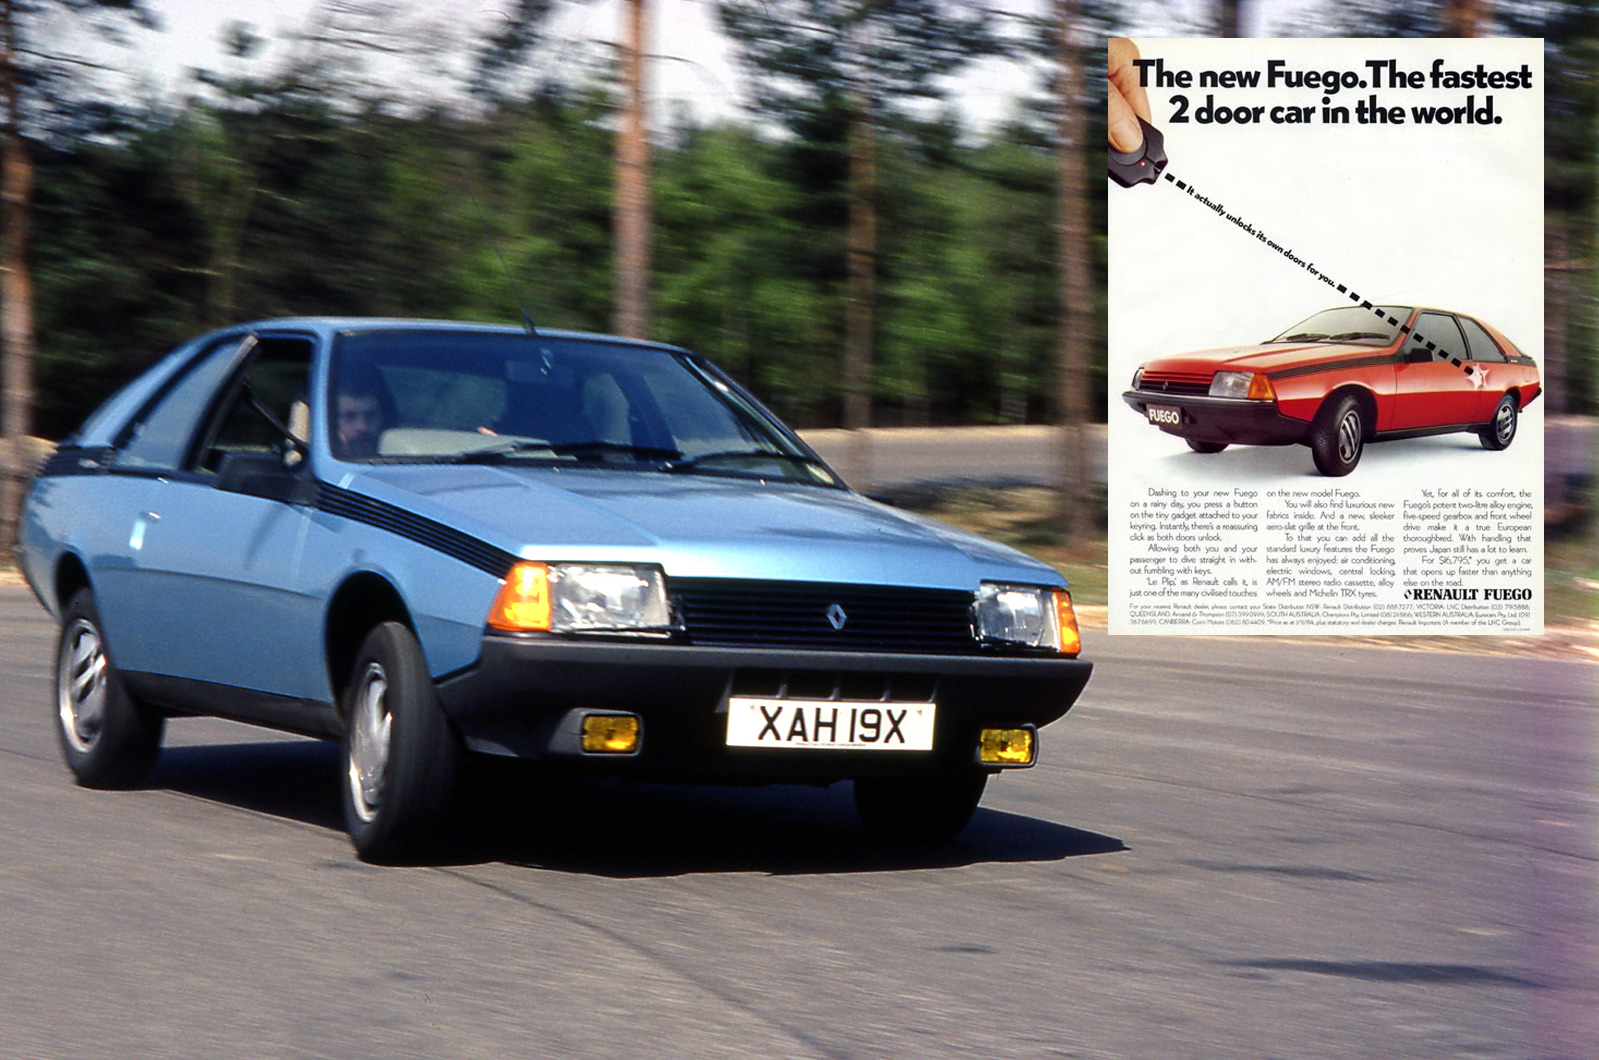 <p>We've got used to being able to lock and unlock our cars from afar, but the <strong>Renault Fuego </strong>was the first car to get remote central locking. The system was called Plip, in honour of its French inventor, <strong>Paul Lipschutz</strong>.</p><p>In America, the Fuego was sold by AMC dealerships, since Renault owned most of AMC at the time. It operated using a coded signal sent via a radio transmitter in the fob. AMC models got the technology shortly after.</p><p><strong>GROUNDBREAKER SCORE: 7 </strong>- nearly all cars have this today, and it’s undeniably useful.</p>